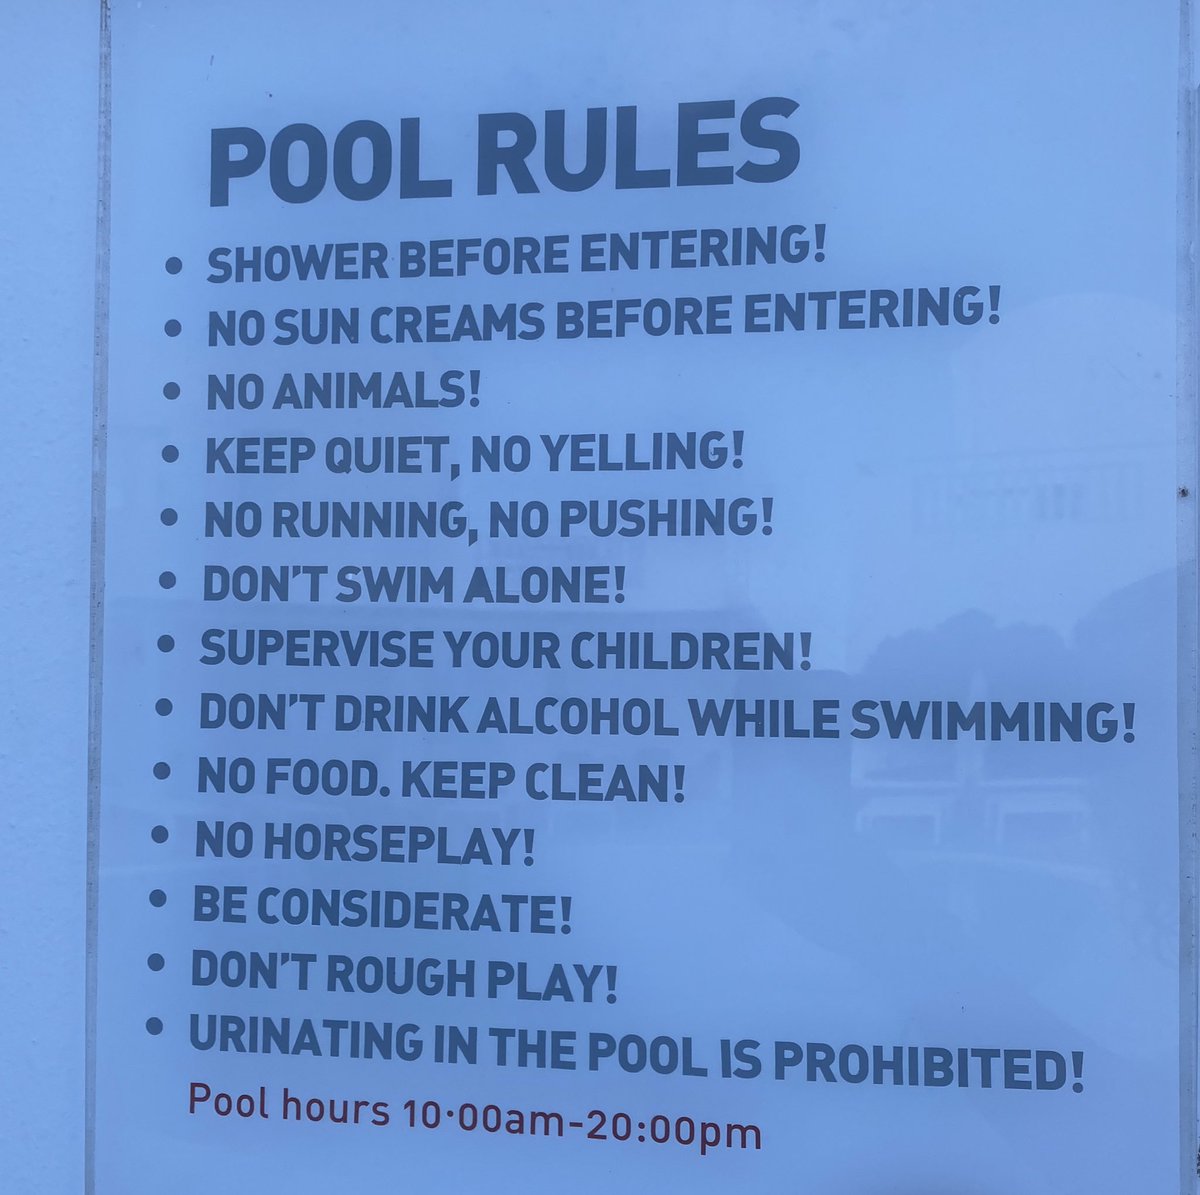 Why is this pool sign so aggressive?